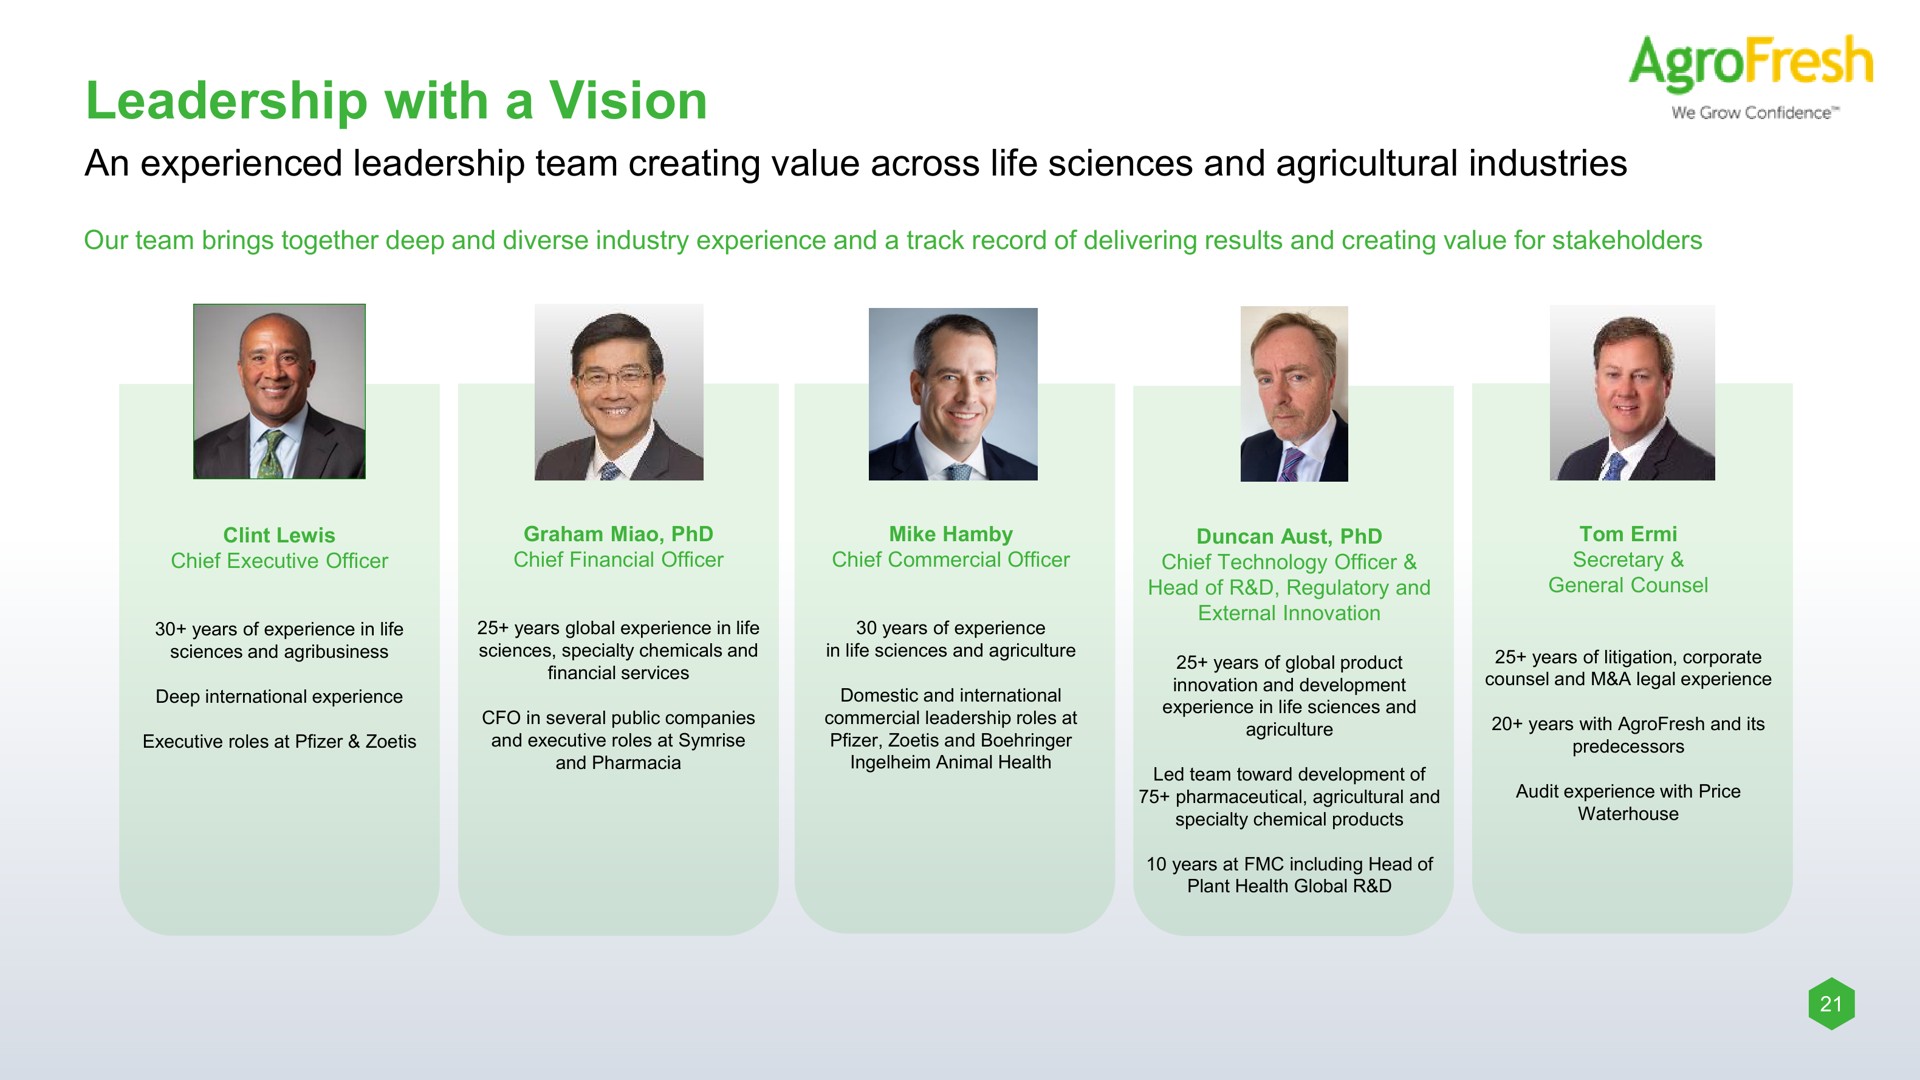 leadership with a vision an experienced team creating value across life sciences and agricultural industries | AgroFresh